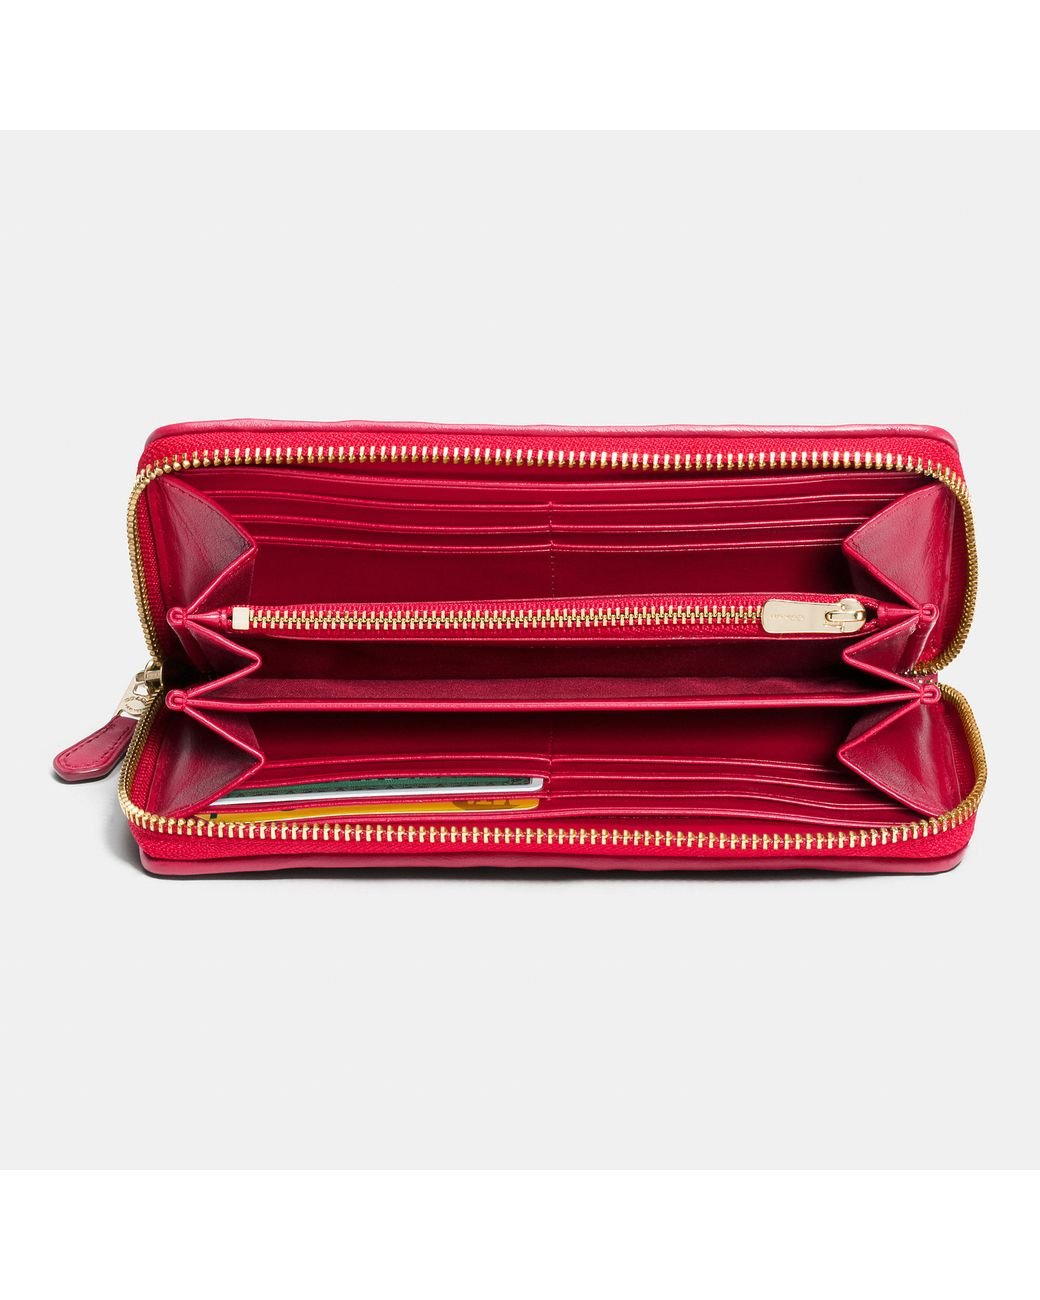 COACH Accordion Zip Wallet In Canyon Quilt Leather in Red